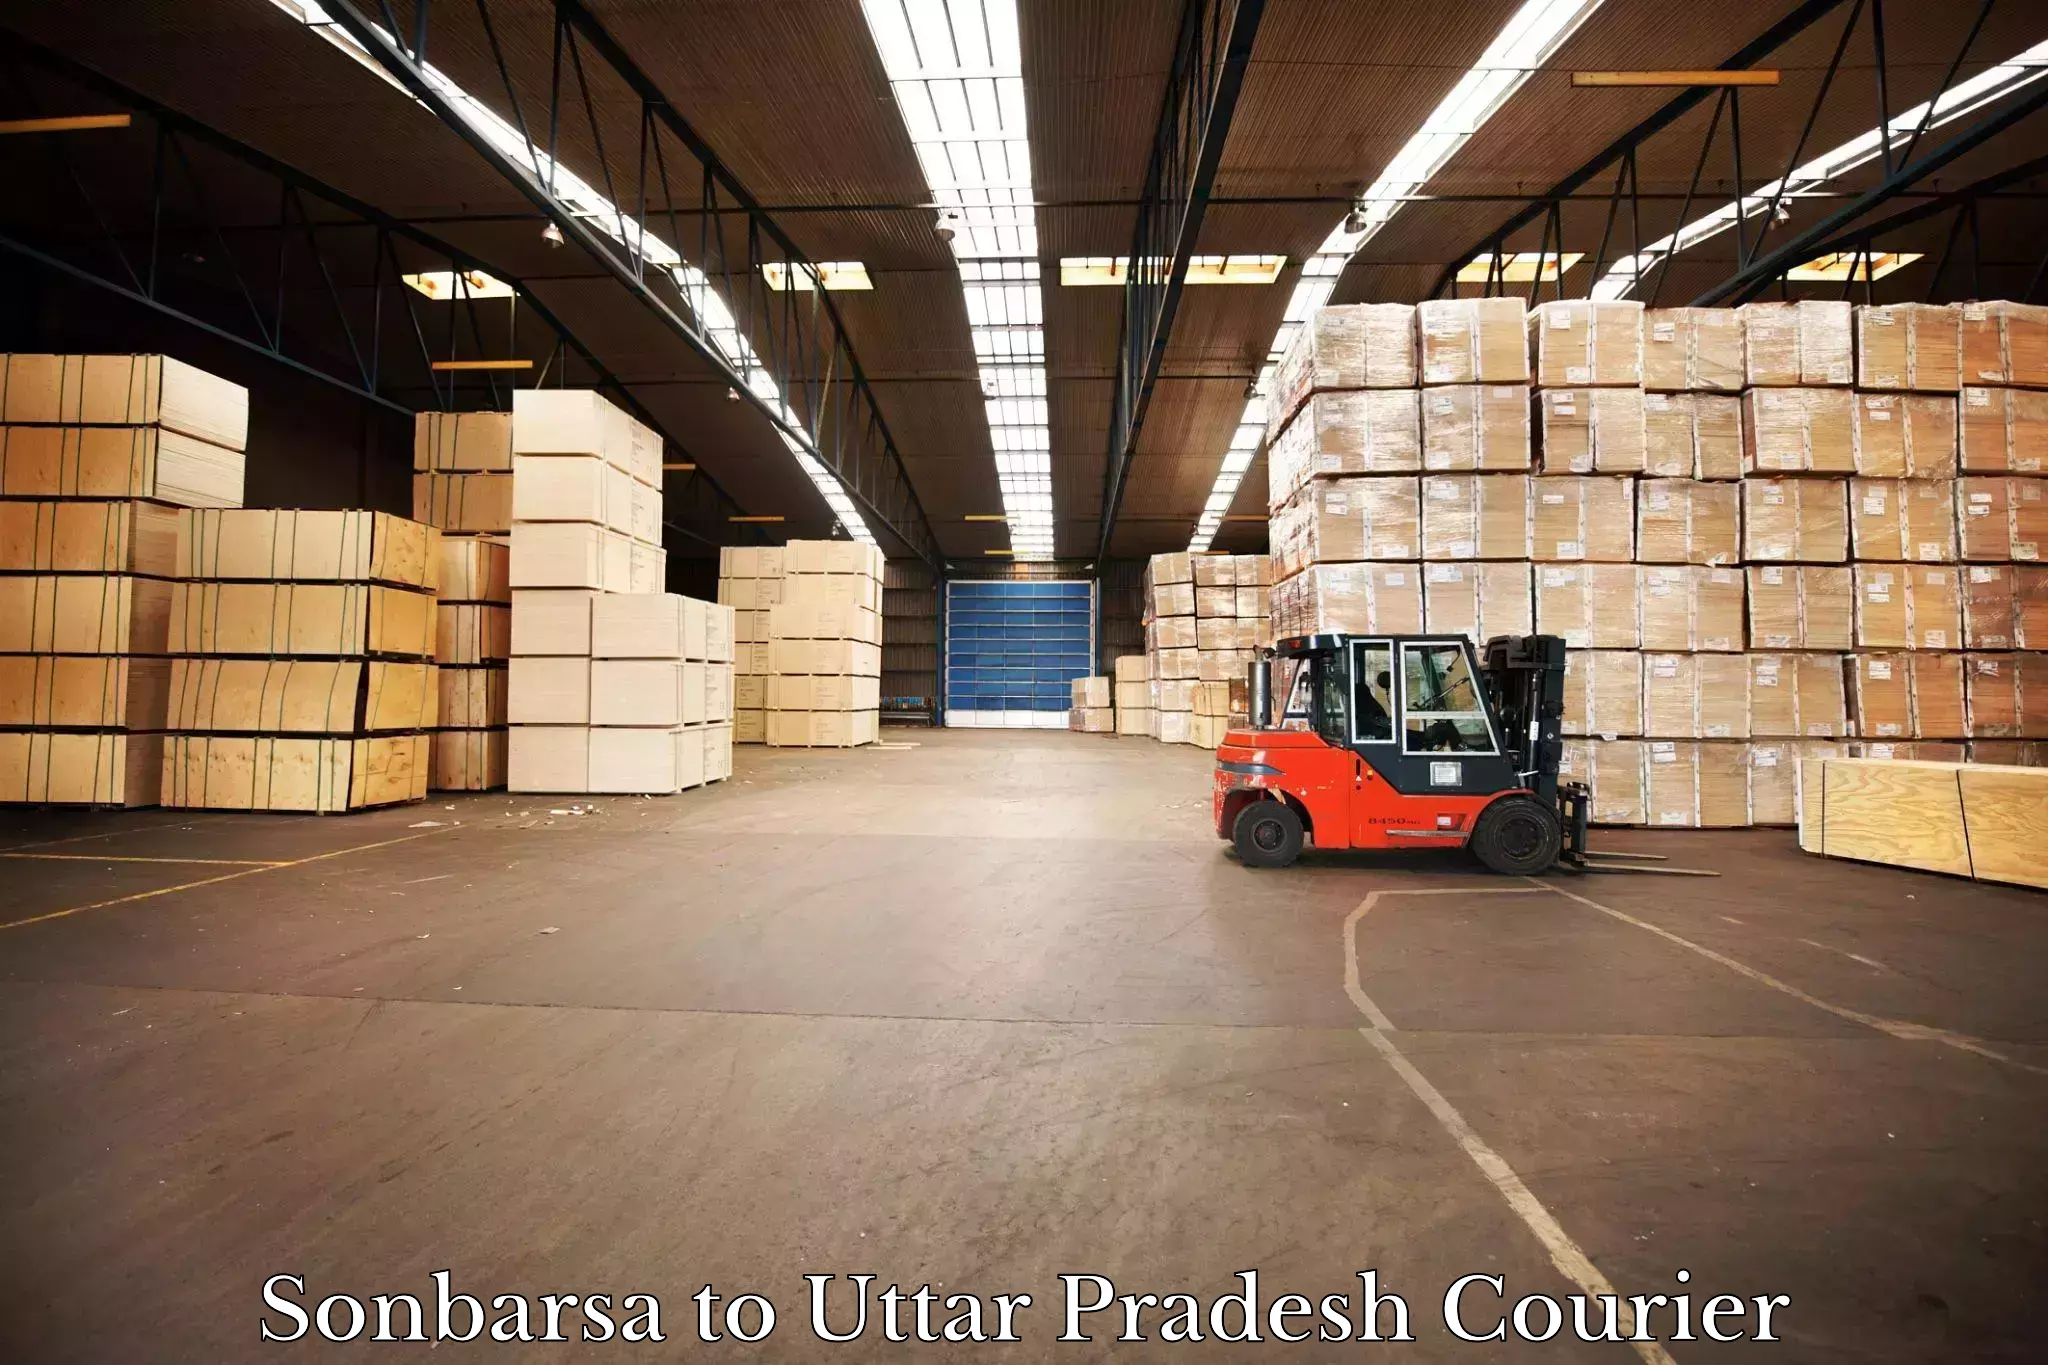 Nationwide shipping coverage Sonbarsa to Fatehabad Agra